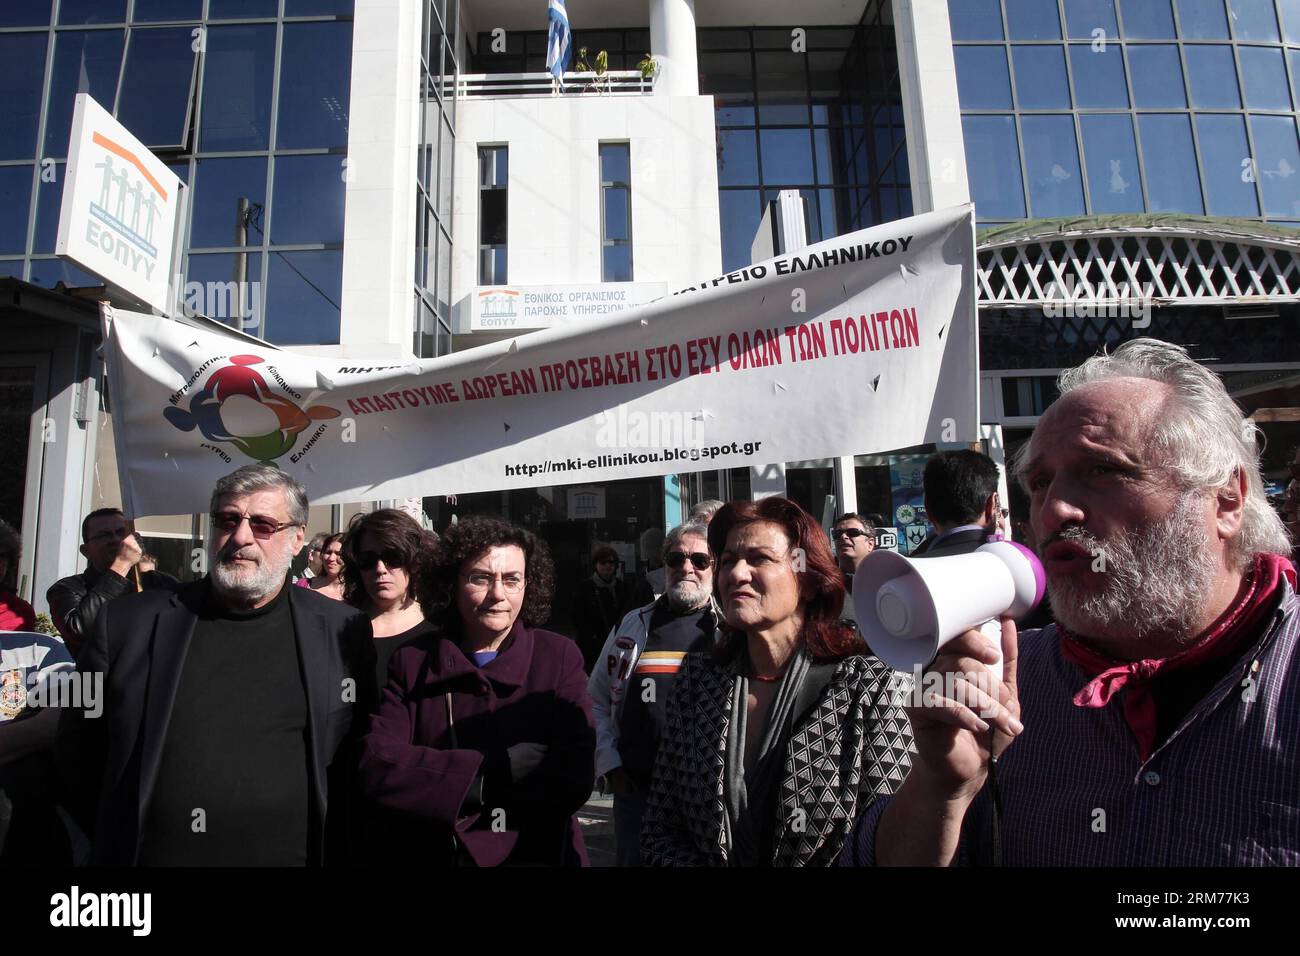 (140217) -- ATHENS, Feb. 17, 2014 (Xinhua) -- Doctors, health workers and other protesters gather outside a branch of the state health fund EOPYY in Athens suburb, Greece, on Feb. 17, 2014, as doctors and other staff members refuse to hand over control of the organization s polyclinics despite the demands of the Health Ministry. Doctors at the state health fund EOPYY have been on strike since November, protesting against a planned restructuring of the loss-making organisation. (Xinhua/Marios Lolos) GREEECE-ATHENS-DEMONSTRATION PUBLICATIONxNOTxINxCHN   Athens Feb 17 2014 XINHUA Doctors Health W Stock Photo